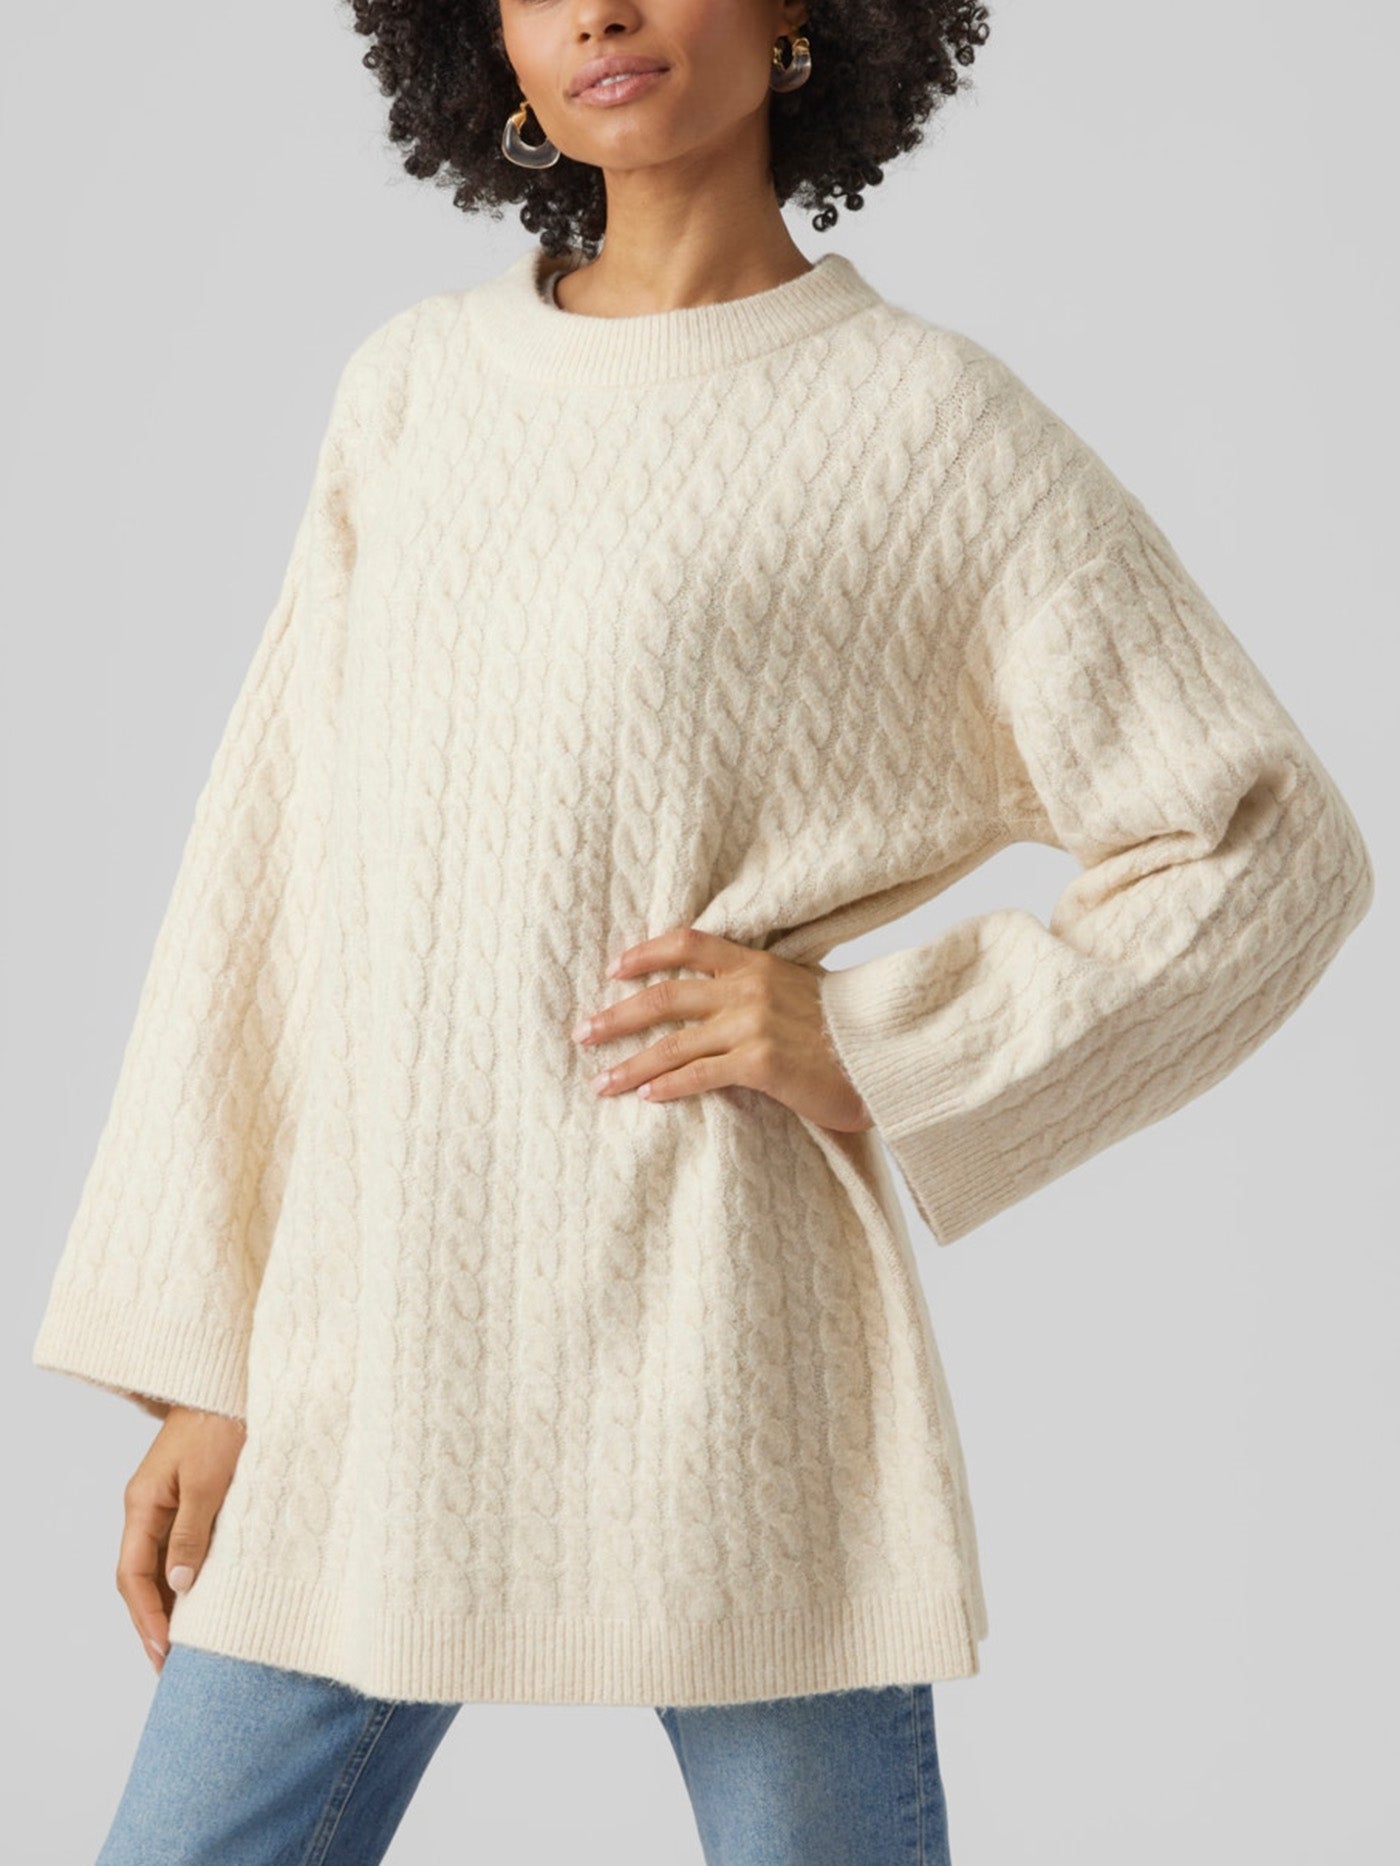 Women's Oversized Comfy Cord Knit Pullover Top